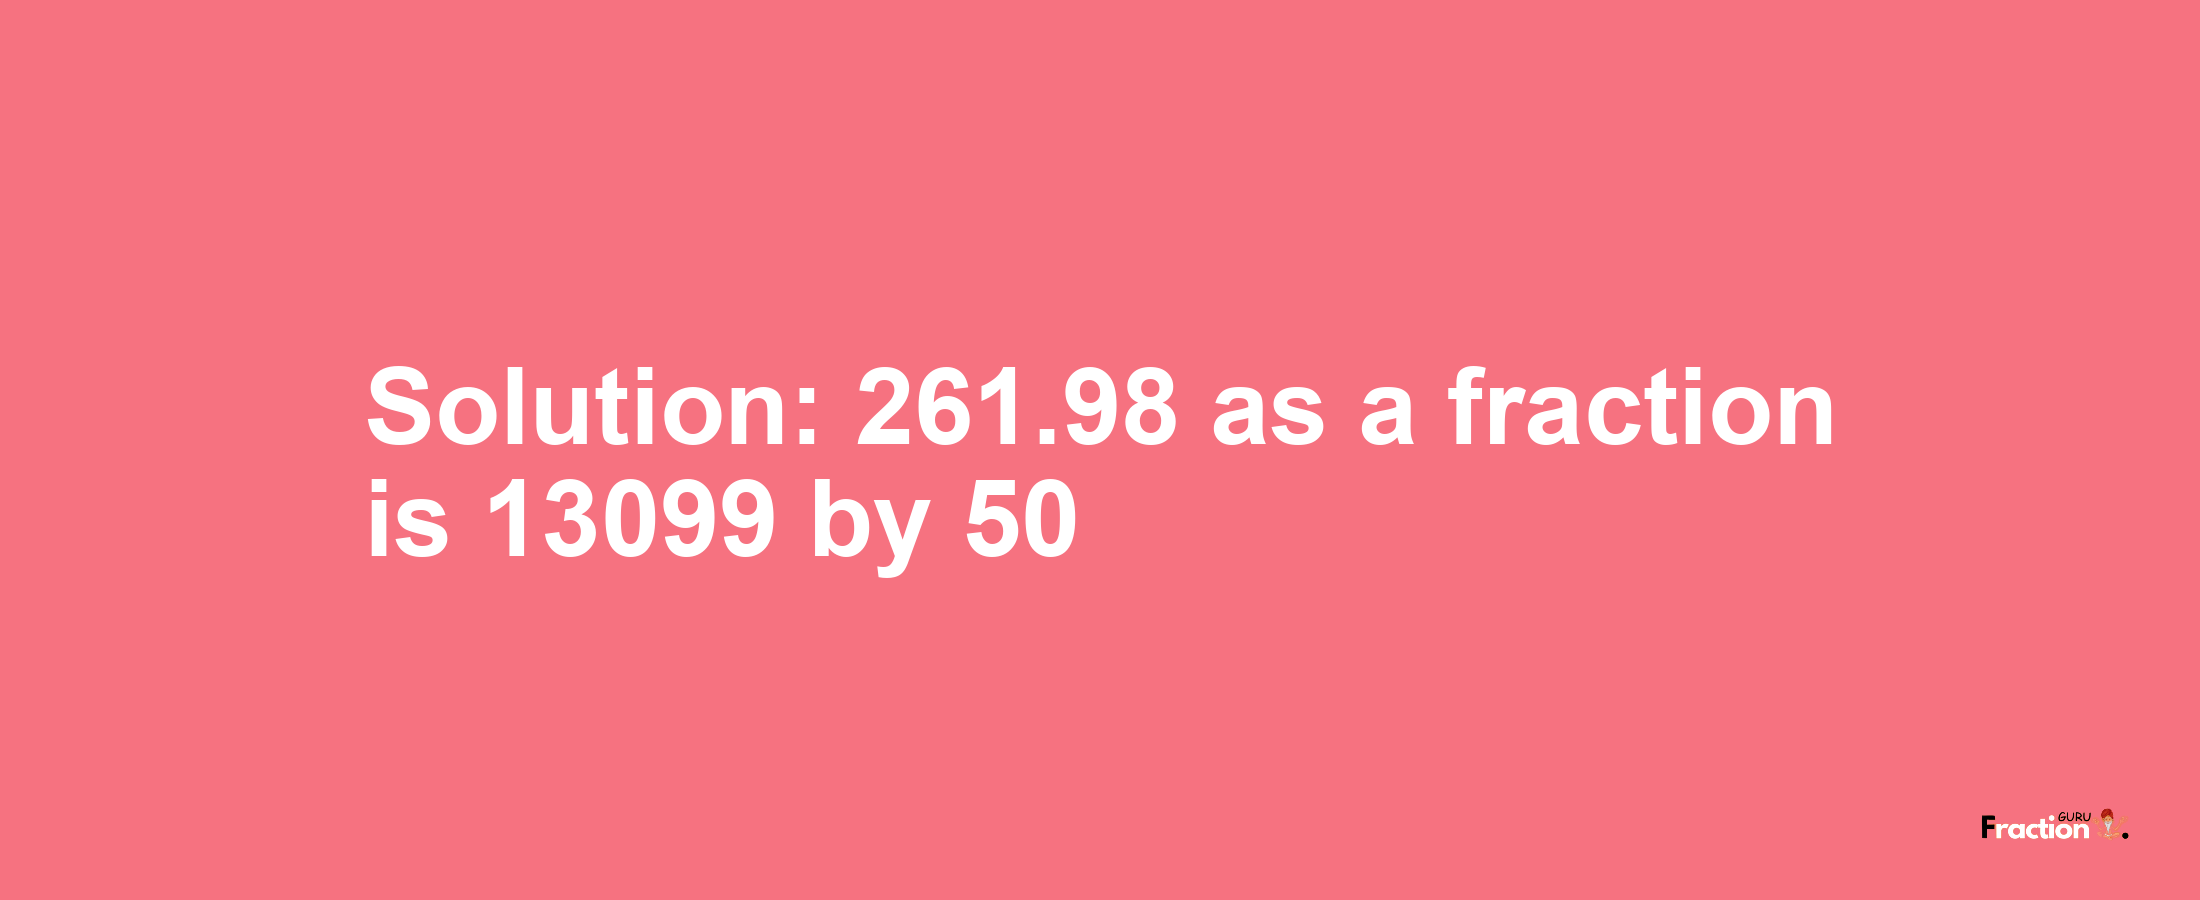 Solution:261.98 as a fraction is 13099/50